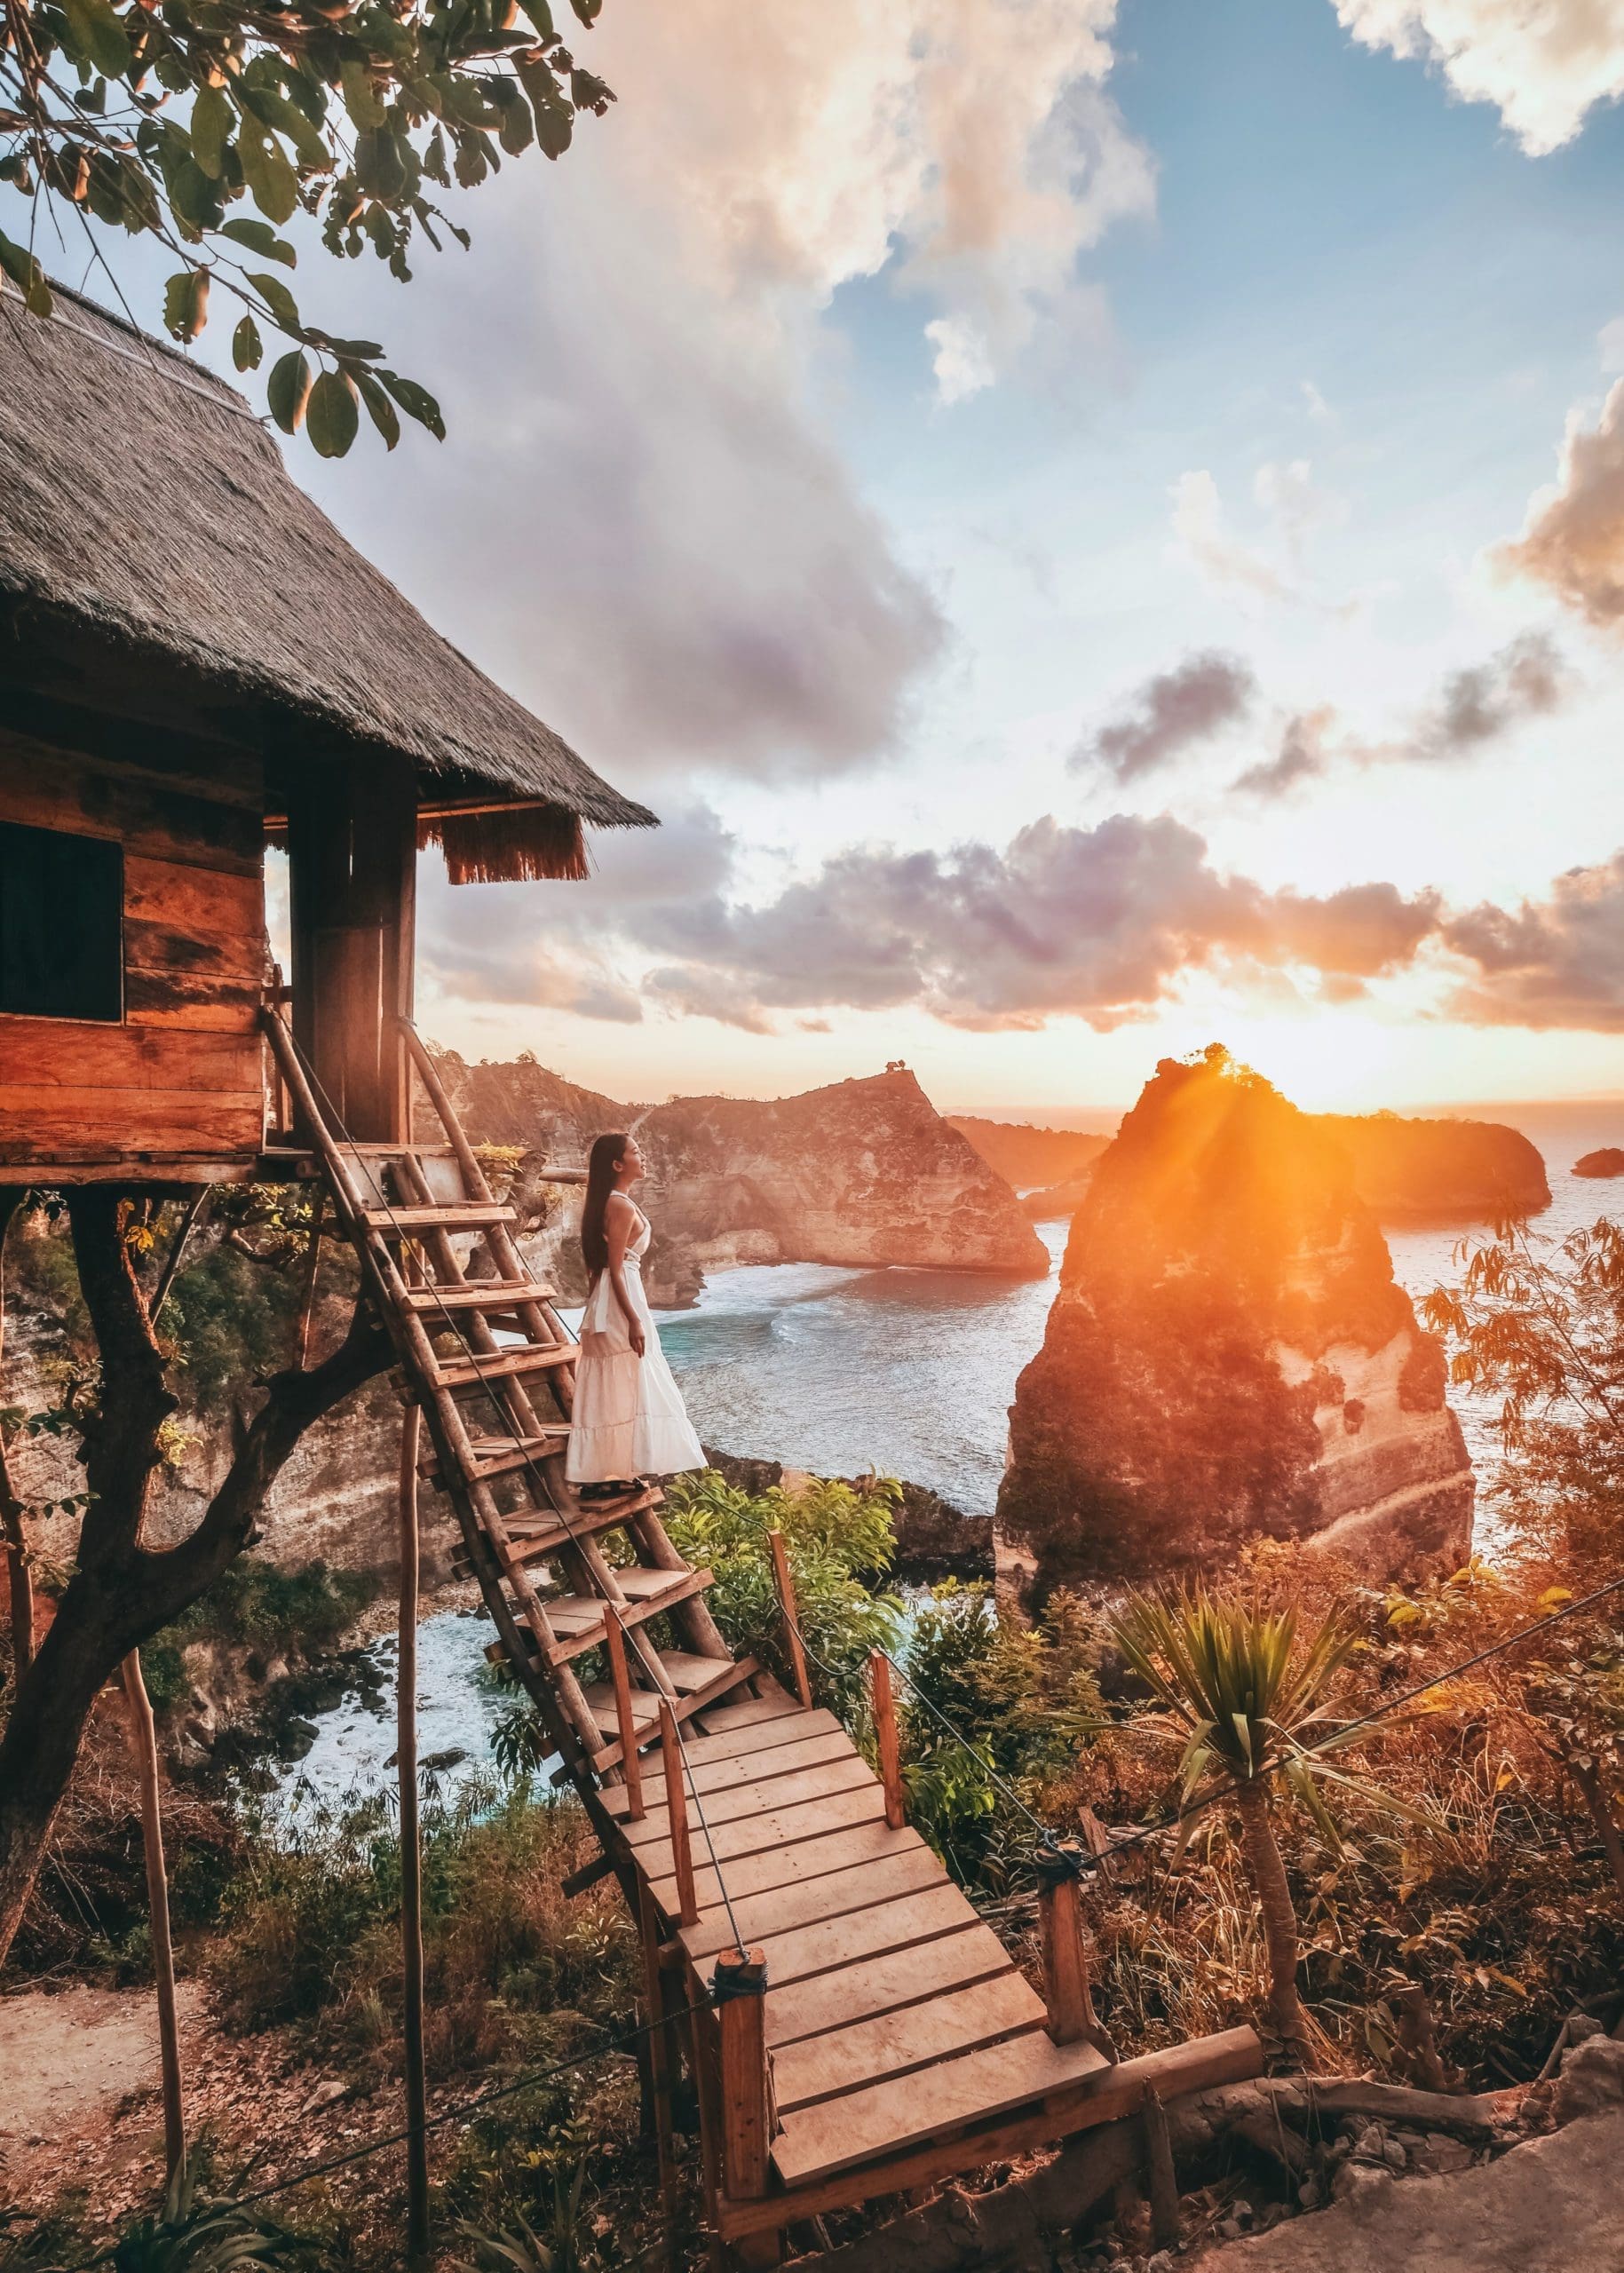 Our Top 12 Honeymoon Destinations For 2022